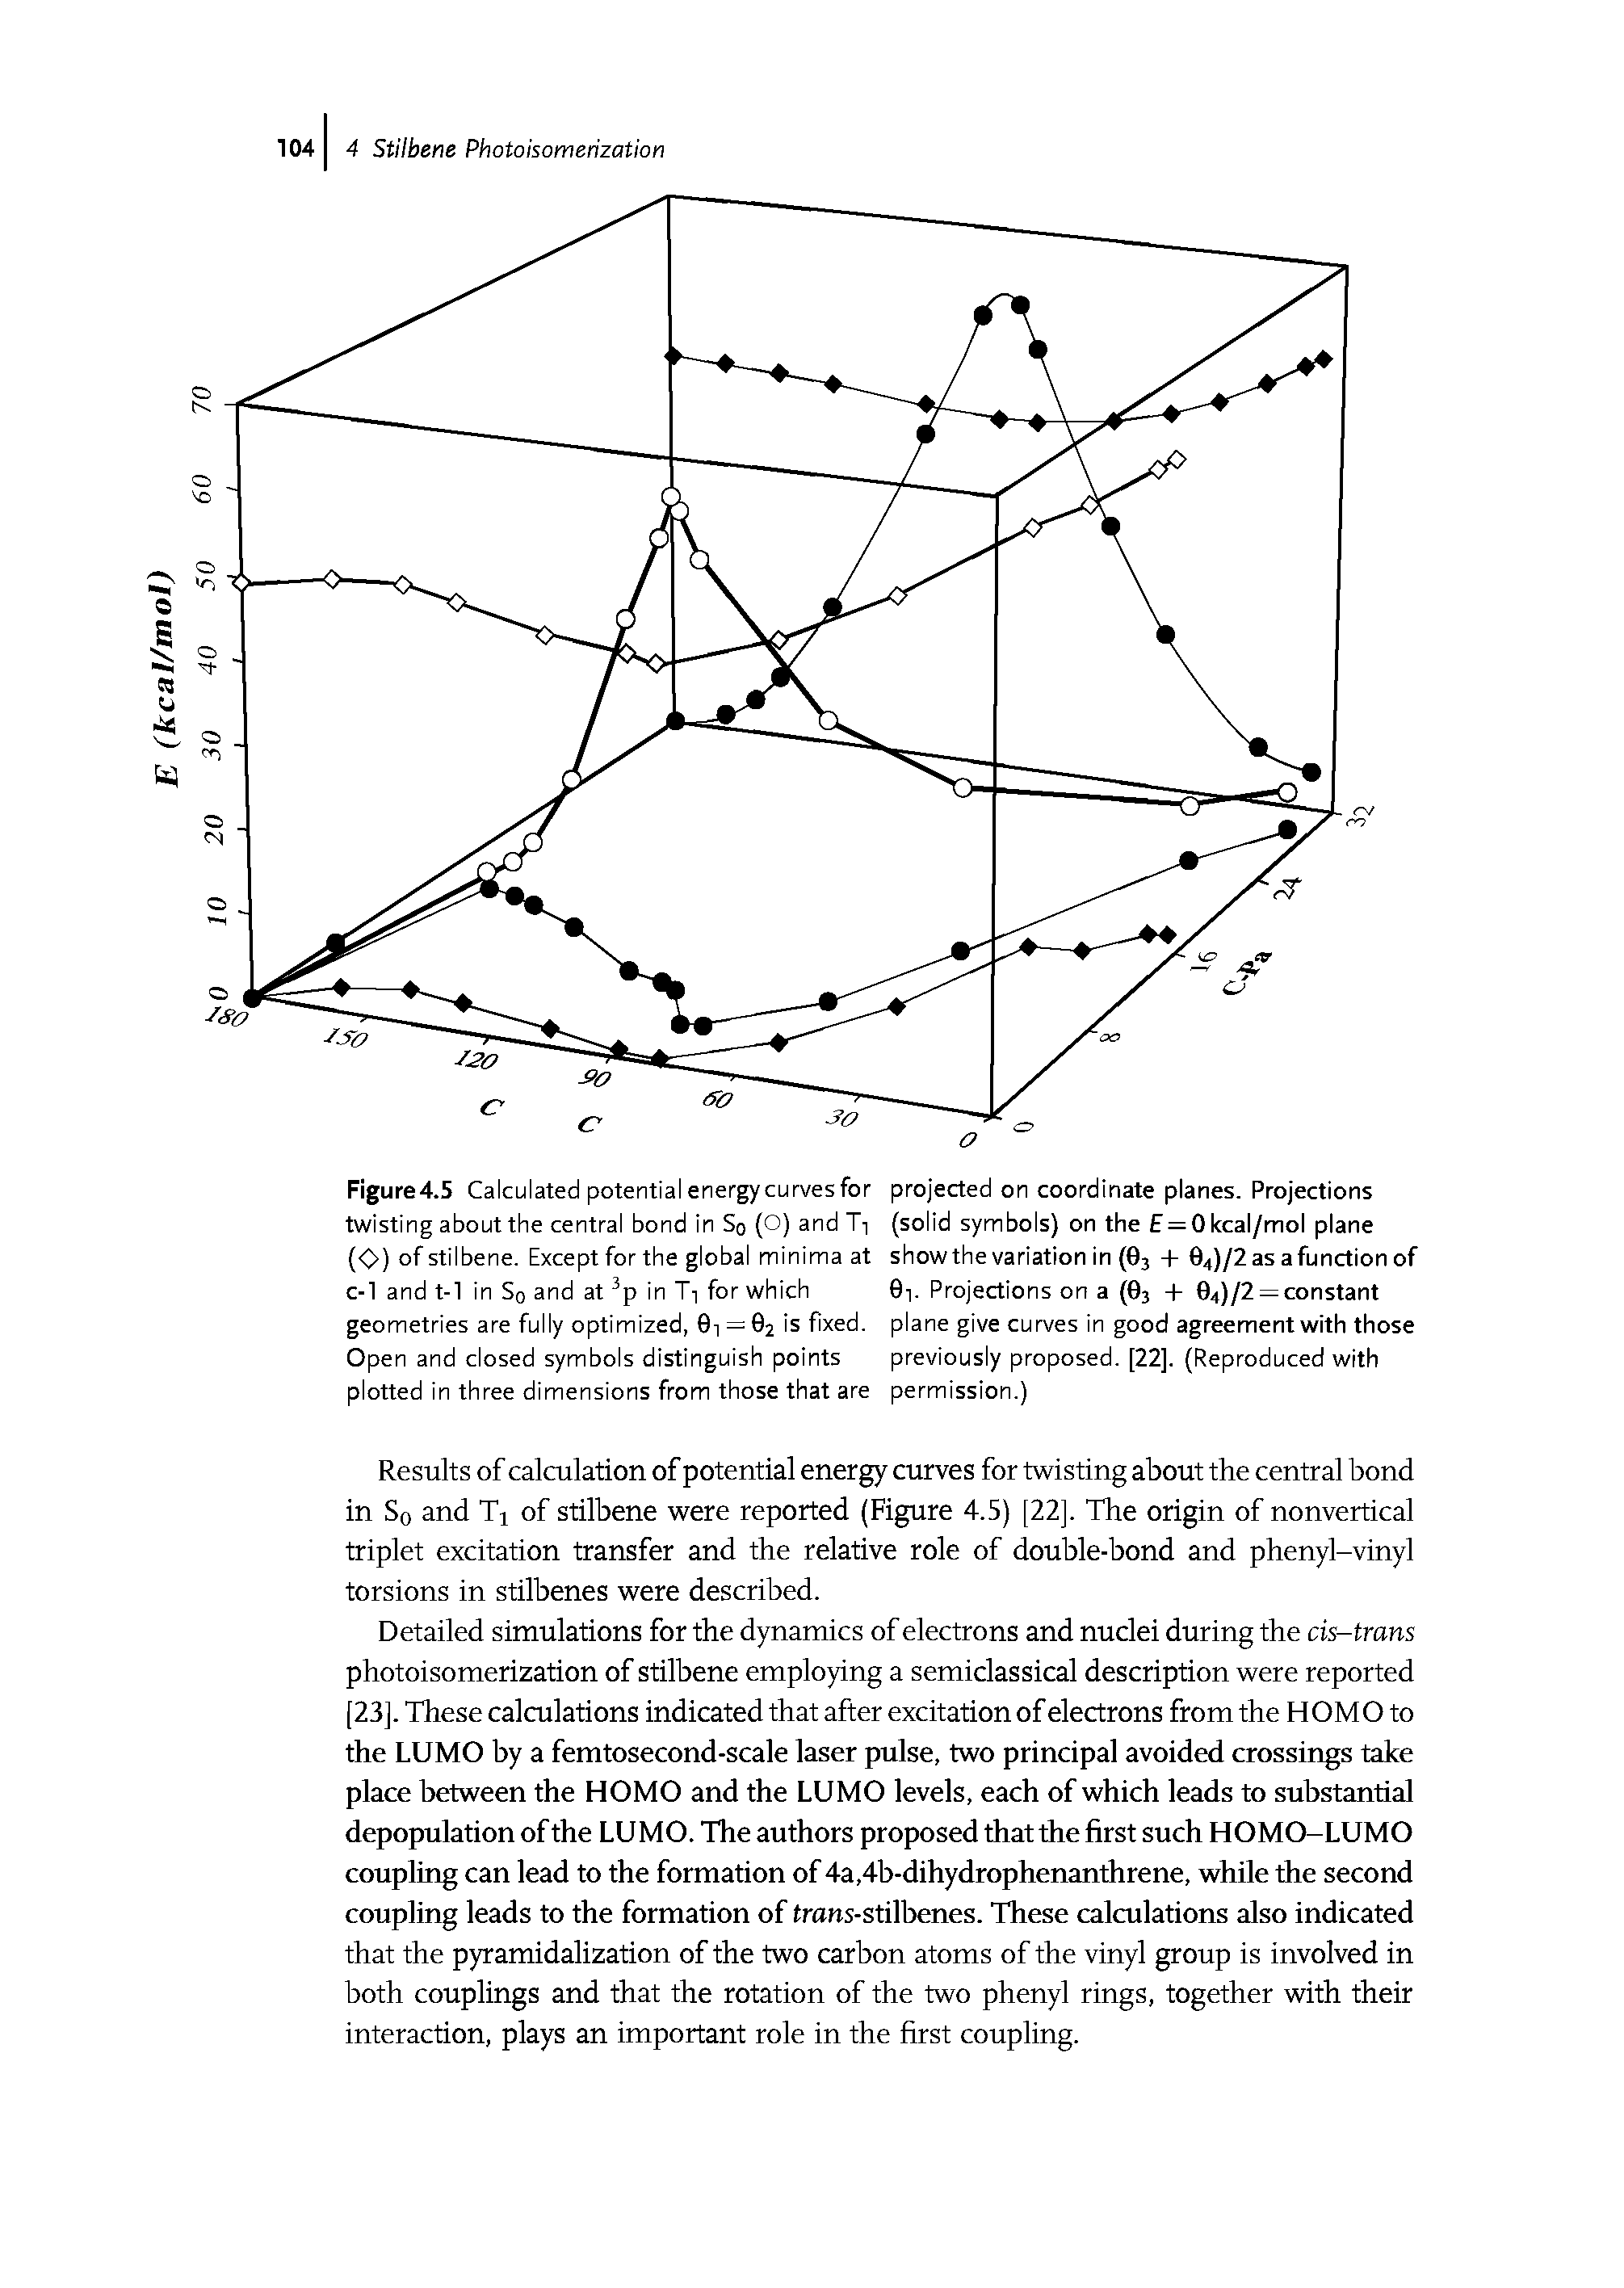 Figure4.5 Calculated potential energy curves for twisting about the central bond in So (O) and Ti (O) of stilbene. Except for the global minima at c-1 and t-1 in So and at in Ti for which geometries are fully optimized, 0i = 02 is fxed. Open and closed symbols distinguish points plotted in three dimensions from those that are...